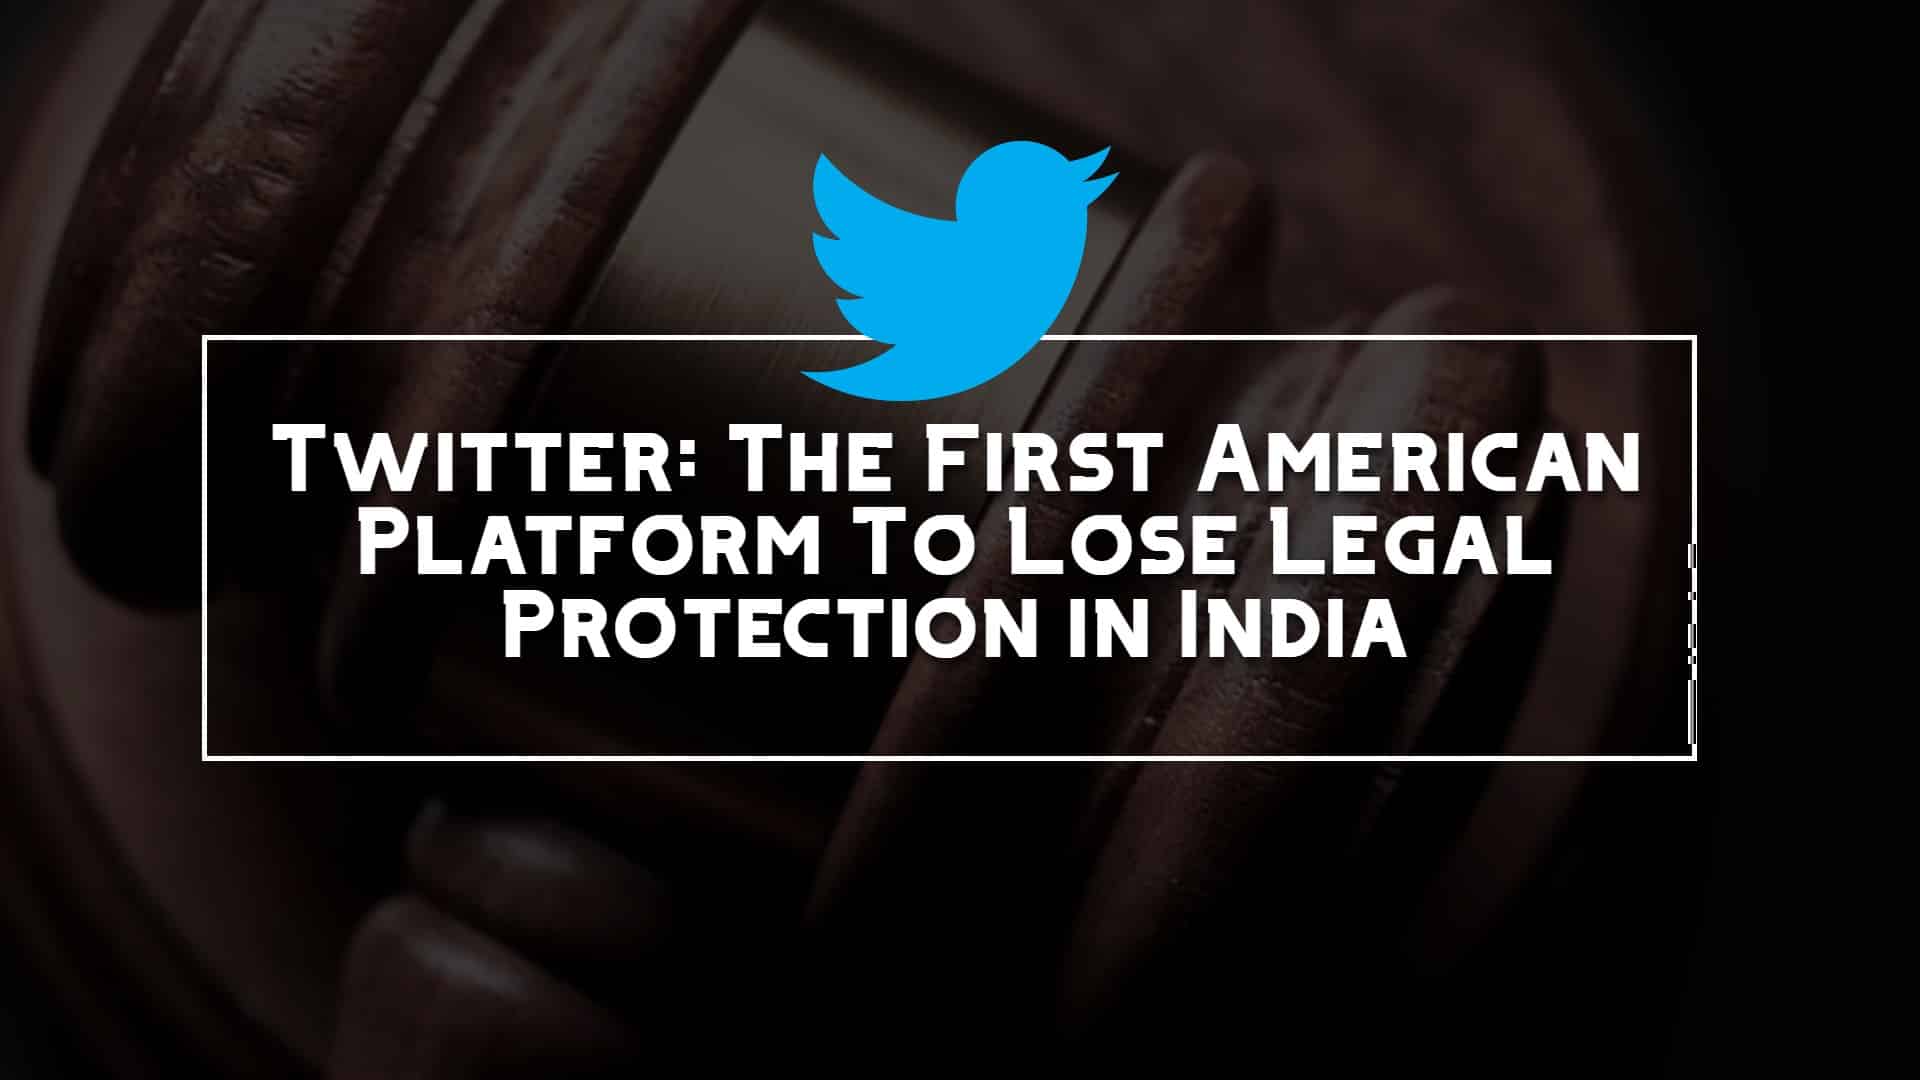 Twitter: The First American Platform To Lose Legal Protection in India